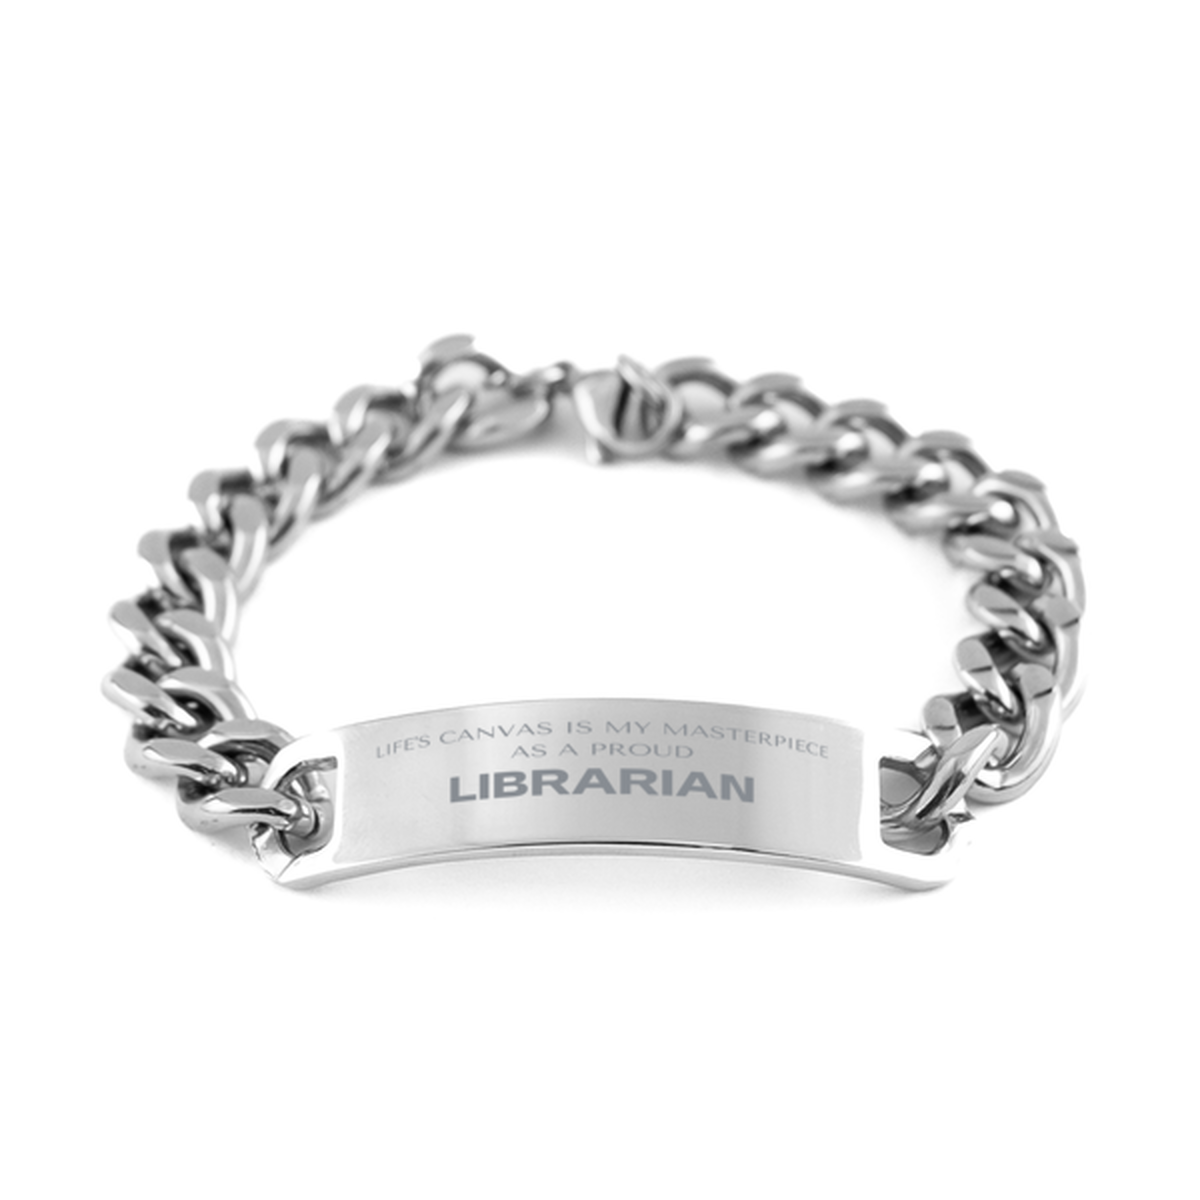 Proud Librarian Gifts, Life's canvas is my masterpiece, Epic Birthday Christmas Unique Cuban Chain Stainless Steel Bracelet For Librarian, Coworkers, Men, Women, Friends